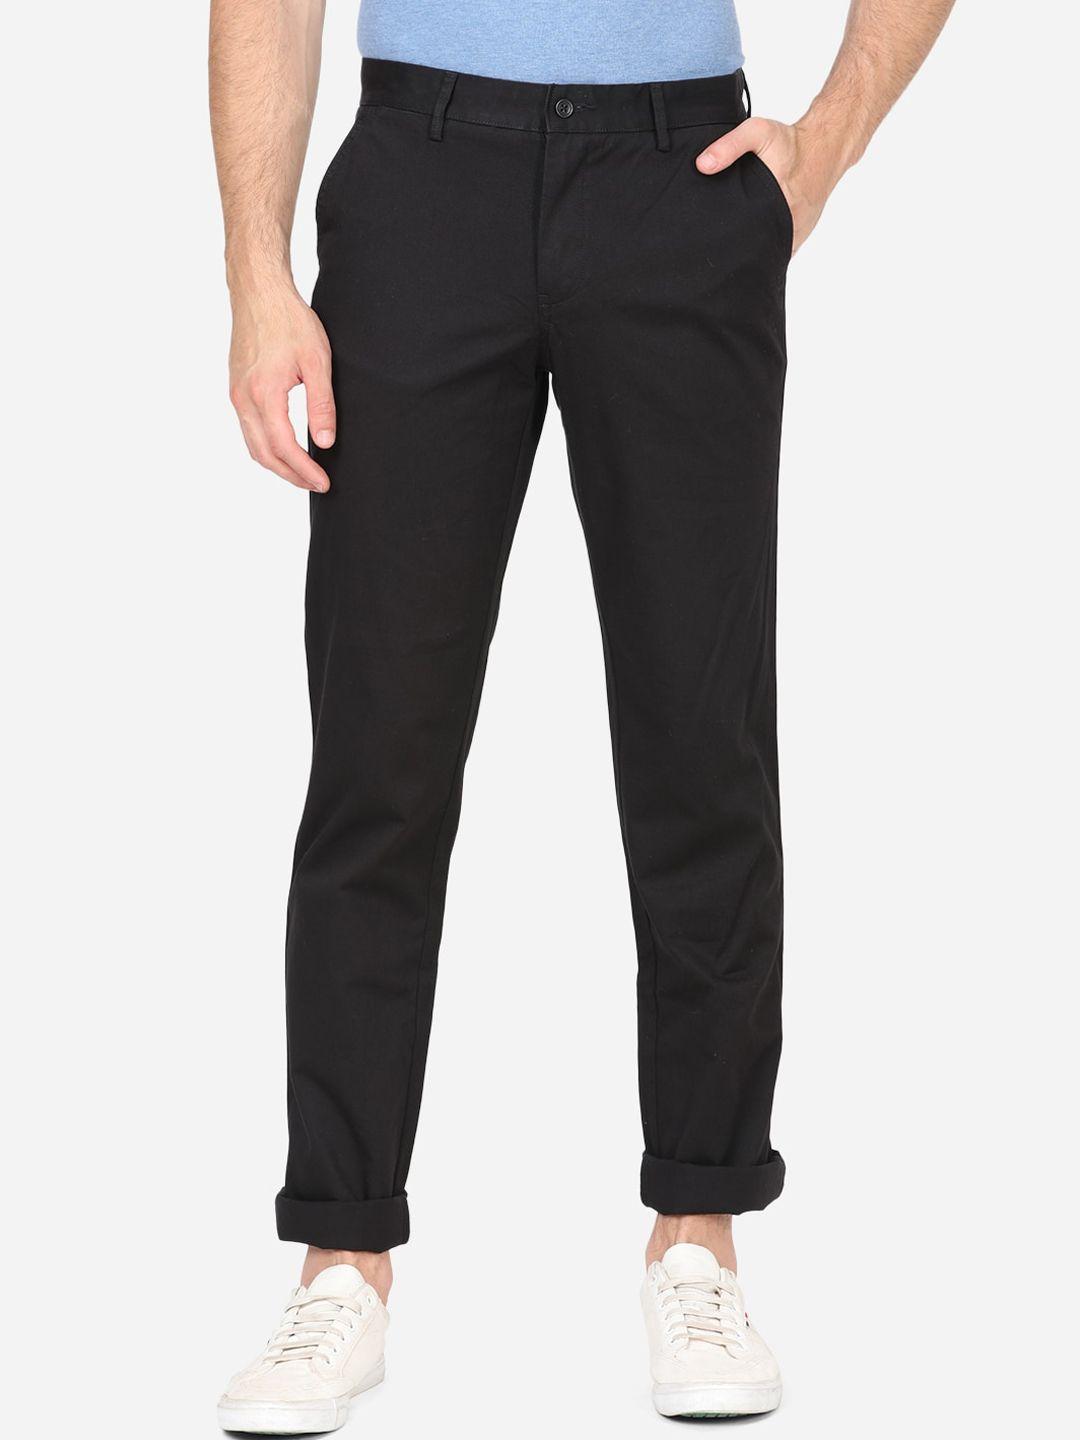 greenfibre-men-black-slim-fit-wrinkle-free-pure-cotton-trousers